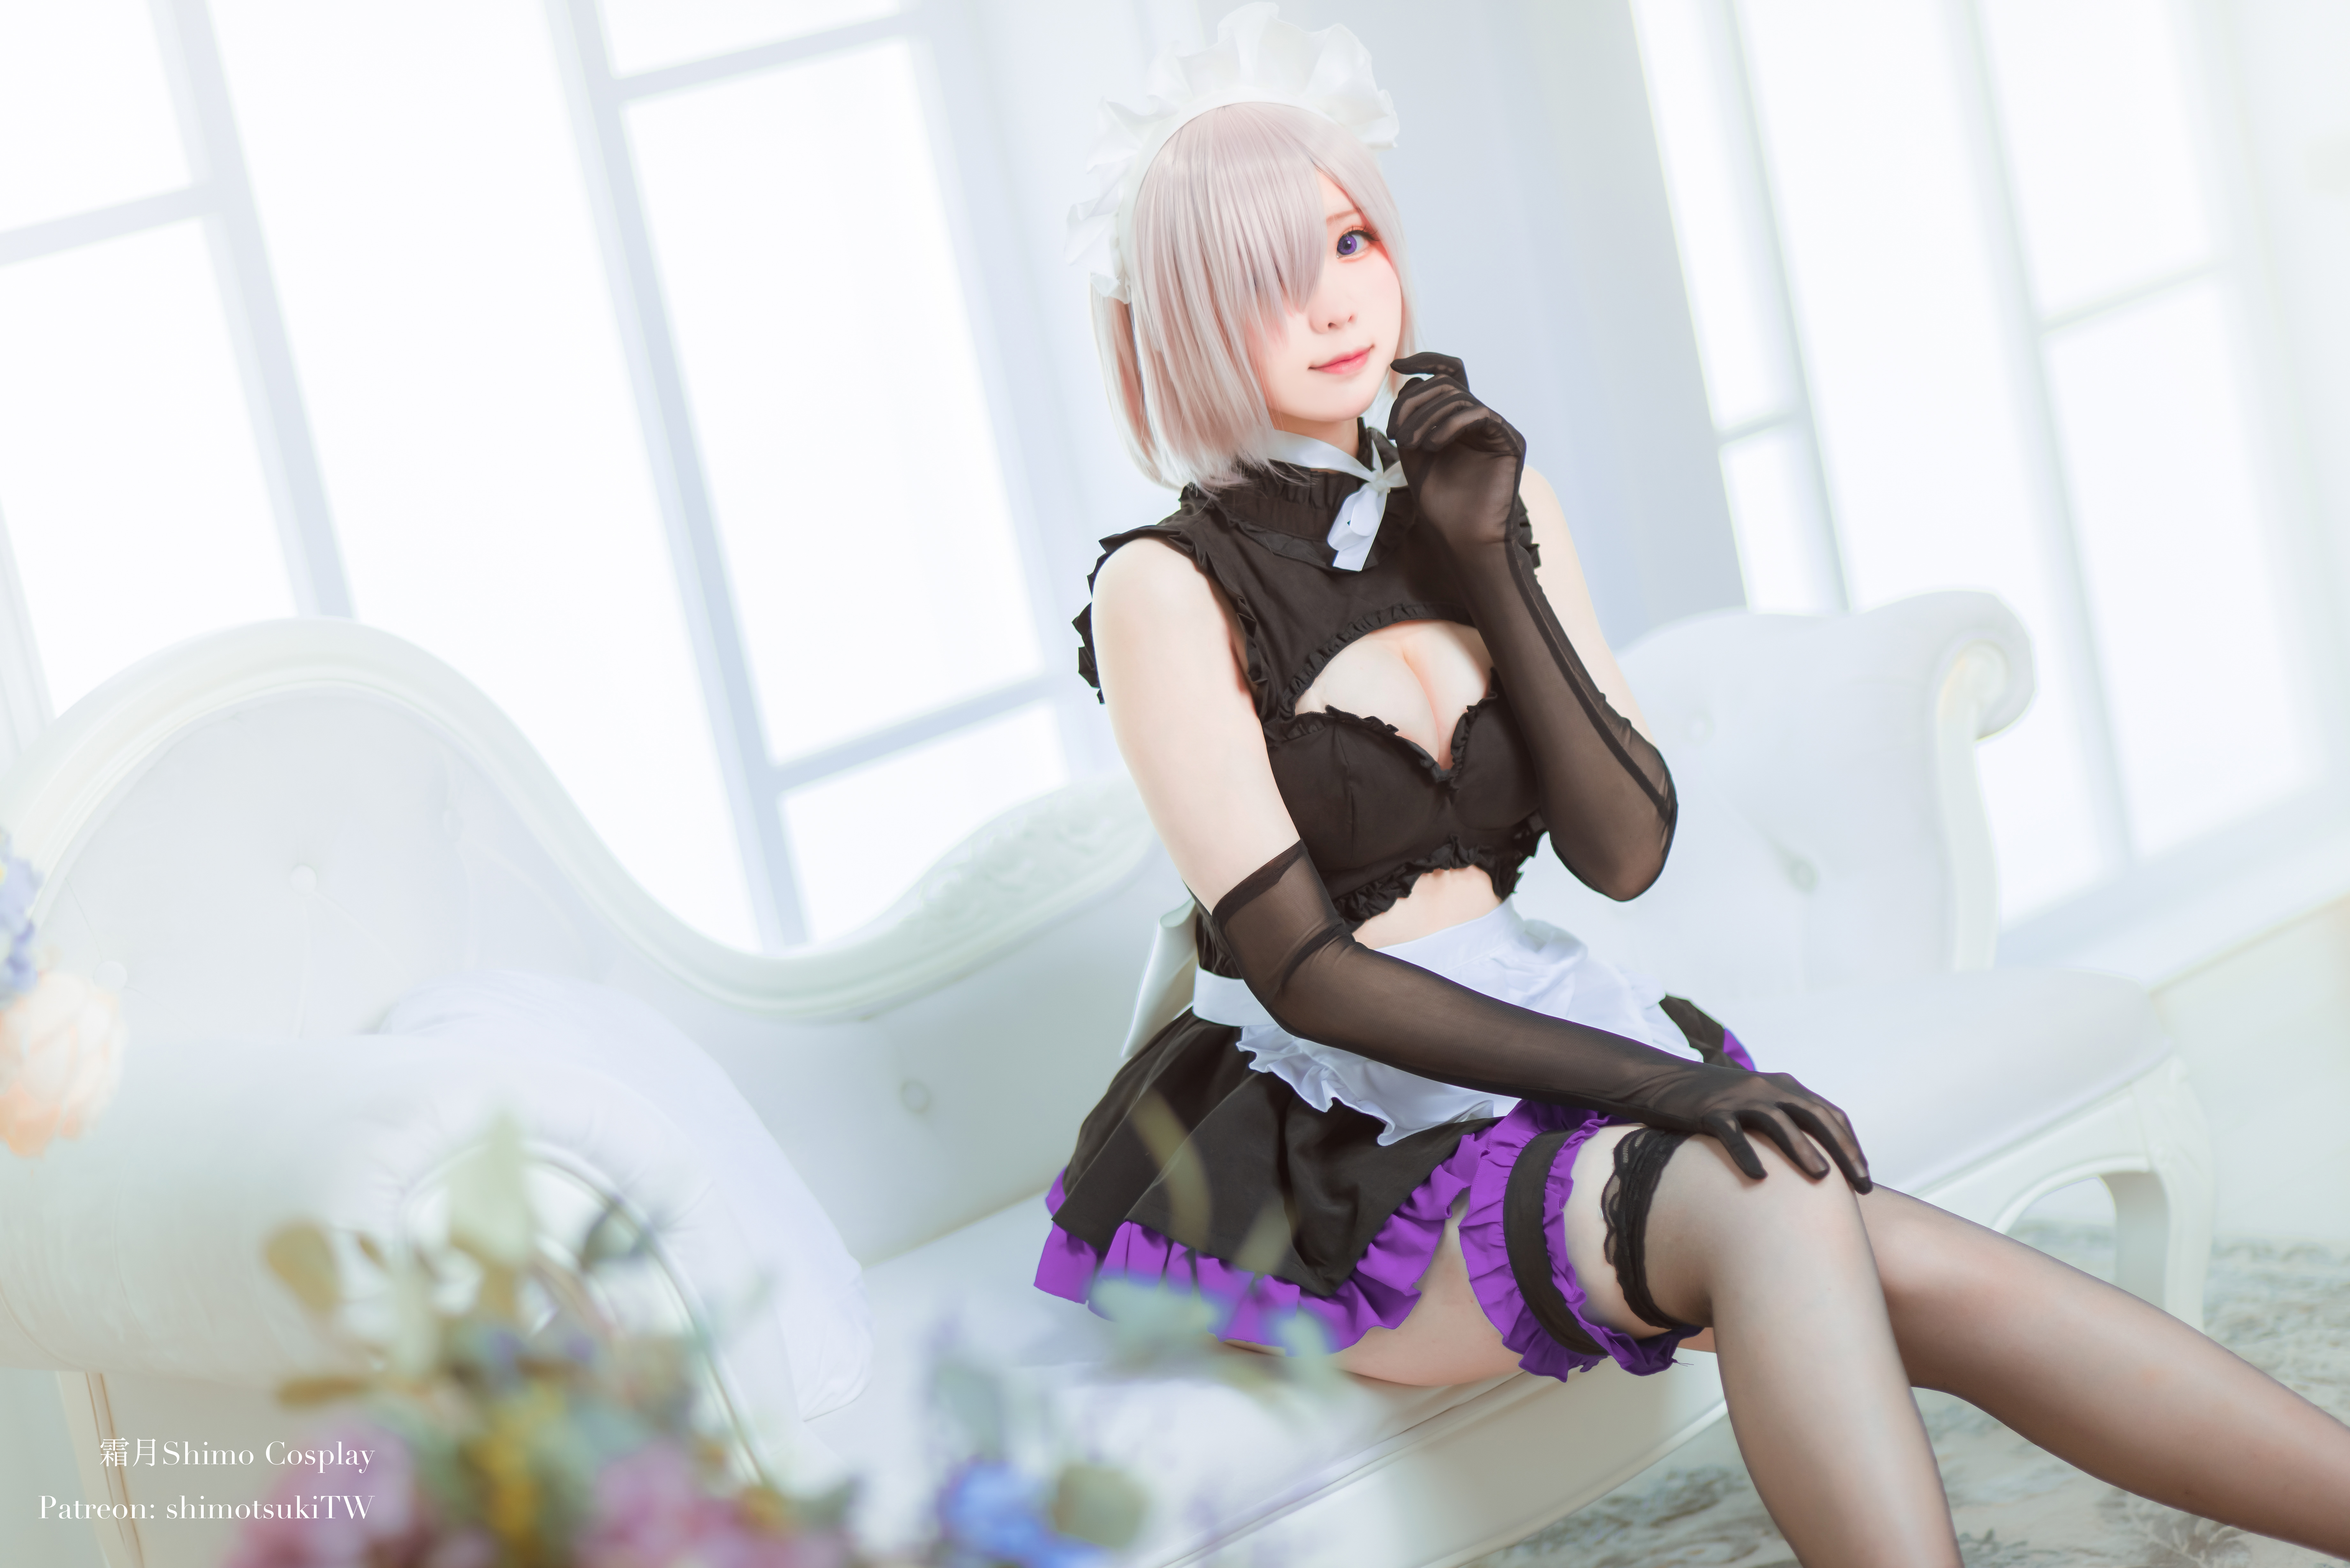 People 7360x4912 Shimo Cosplay women model Asian cosplay Mash Kyrielight Fate series Fate/Grand Order anime anime girls maid maid outfit dress stockings black stockings lace thigh strap cleavage sitting indoors women indoors